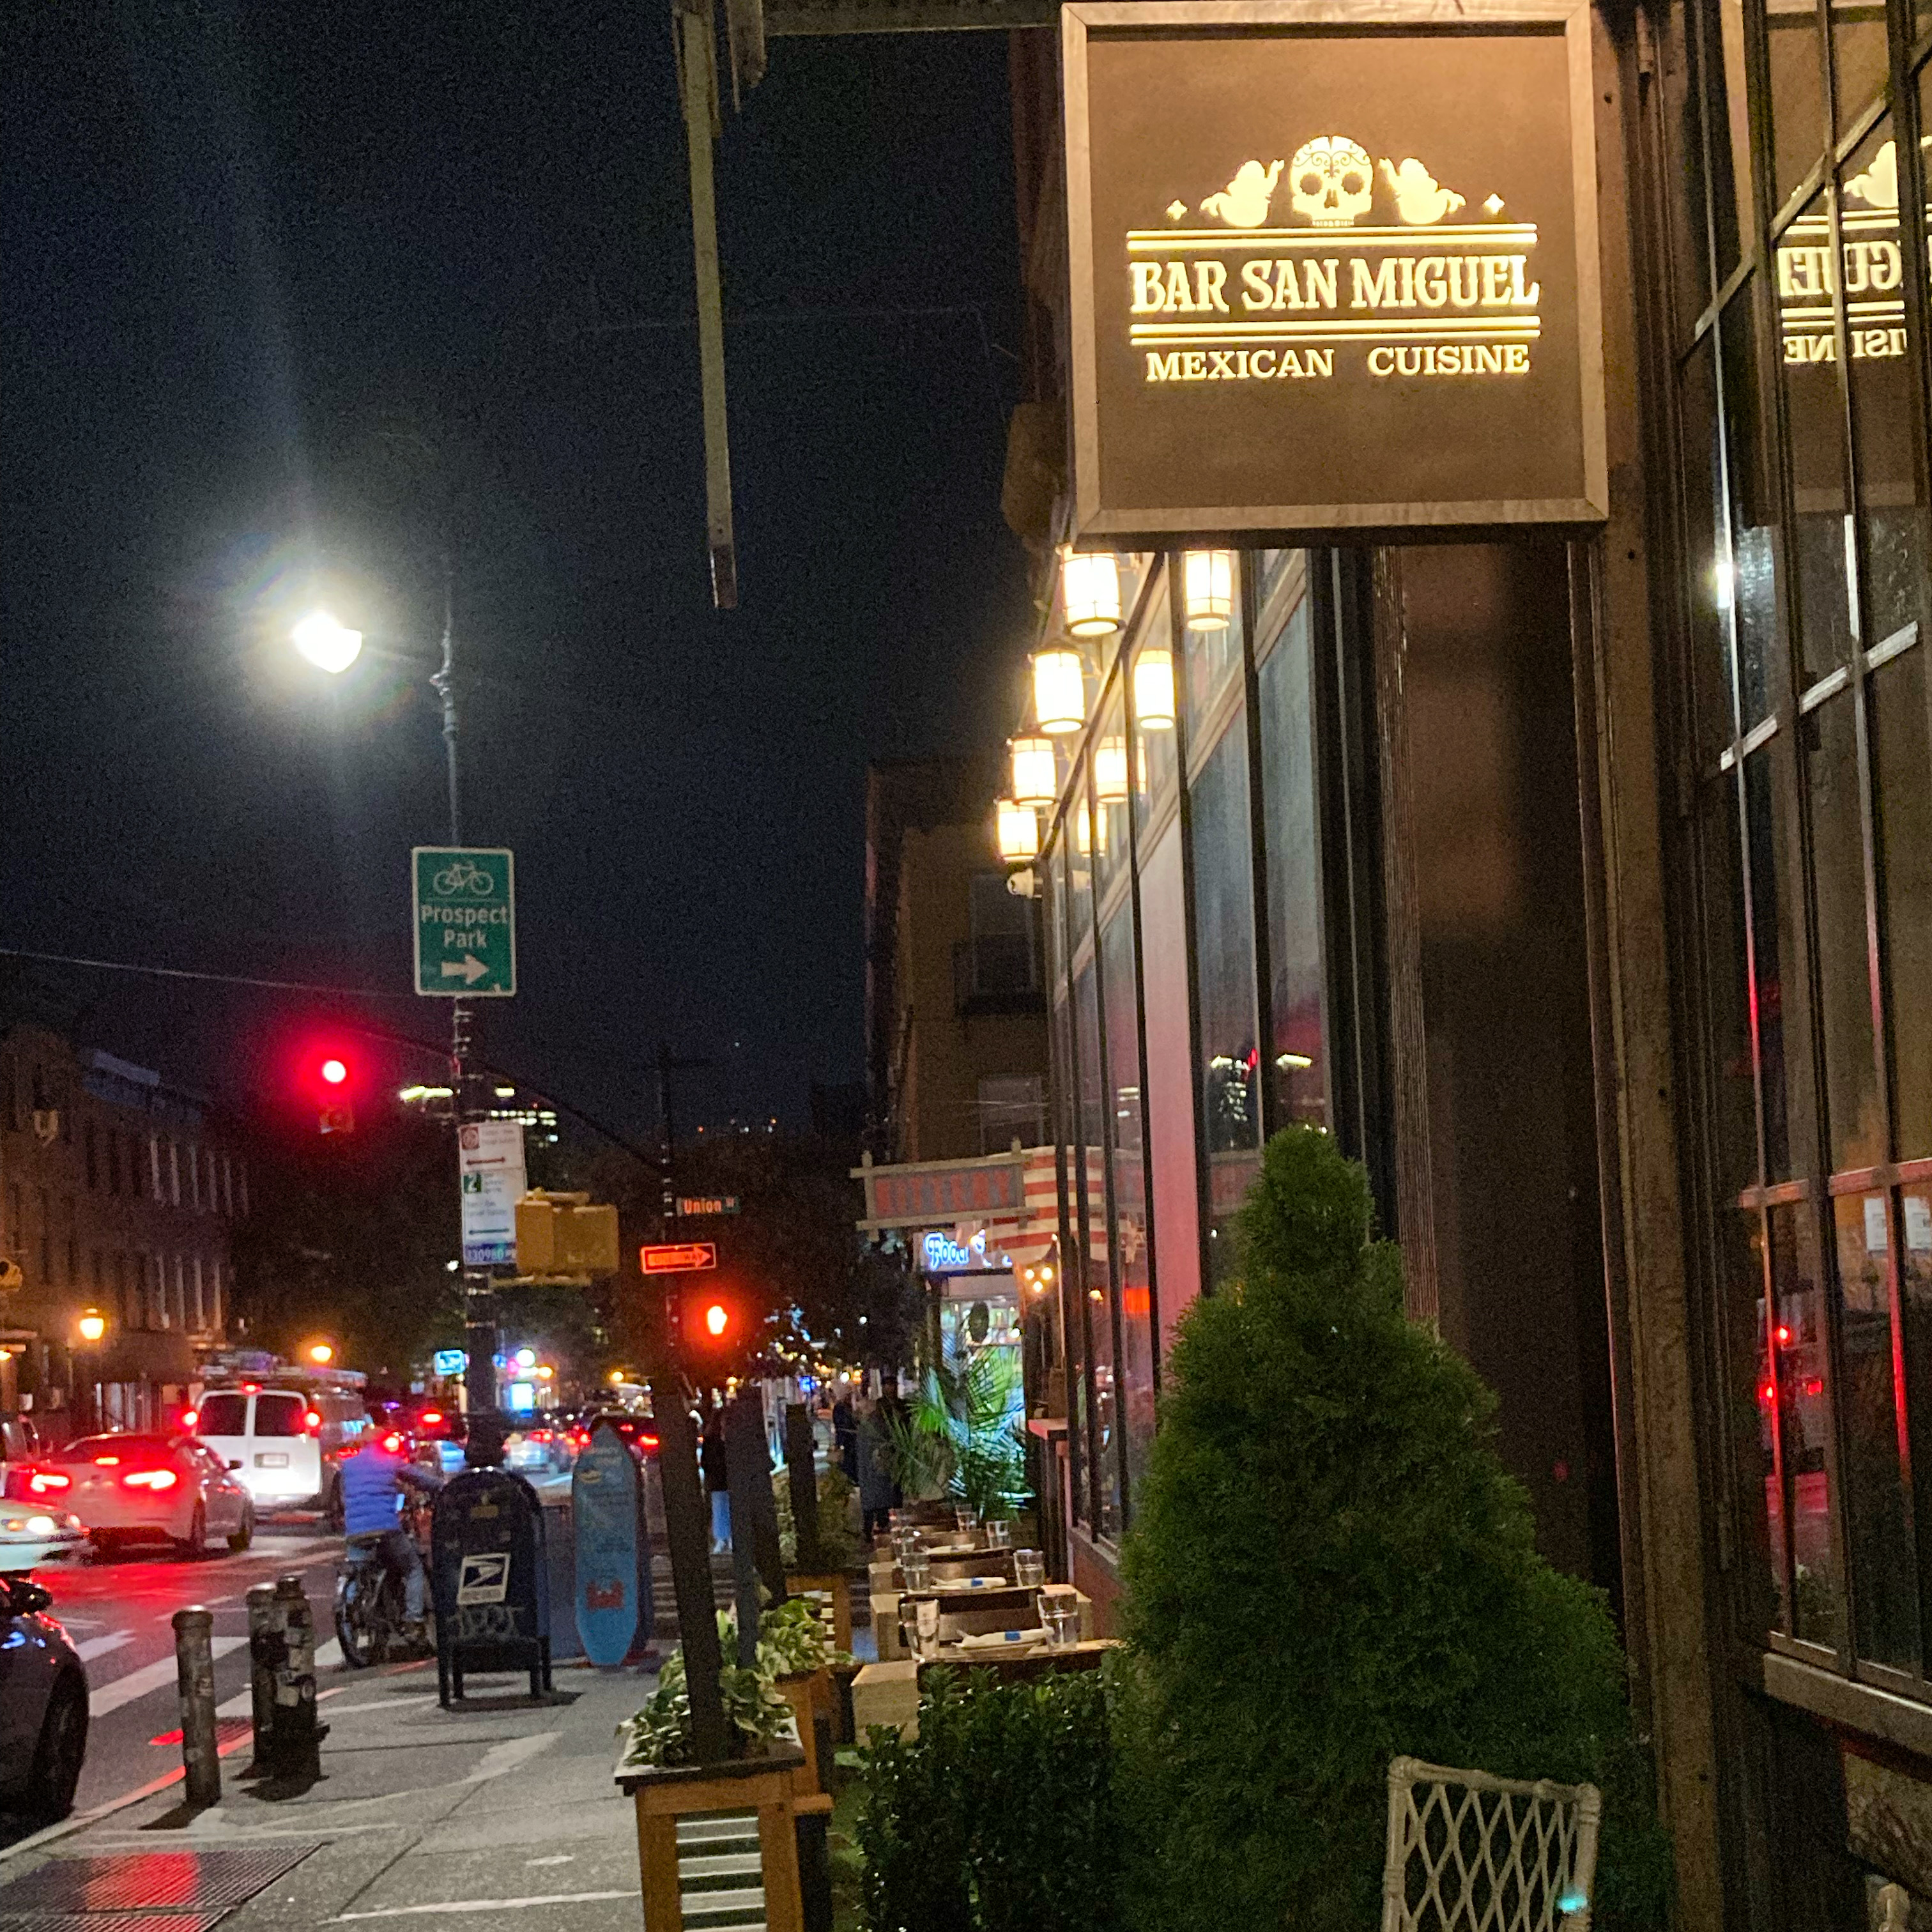 A nighttime view of the street outside Brooklyn Bar San Miguel